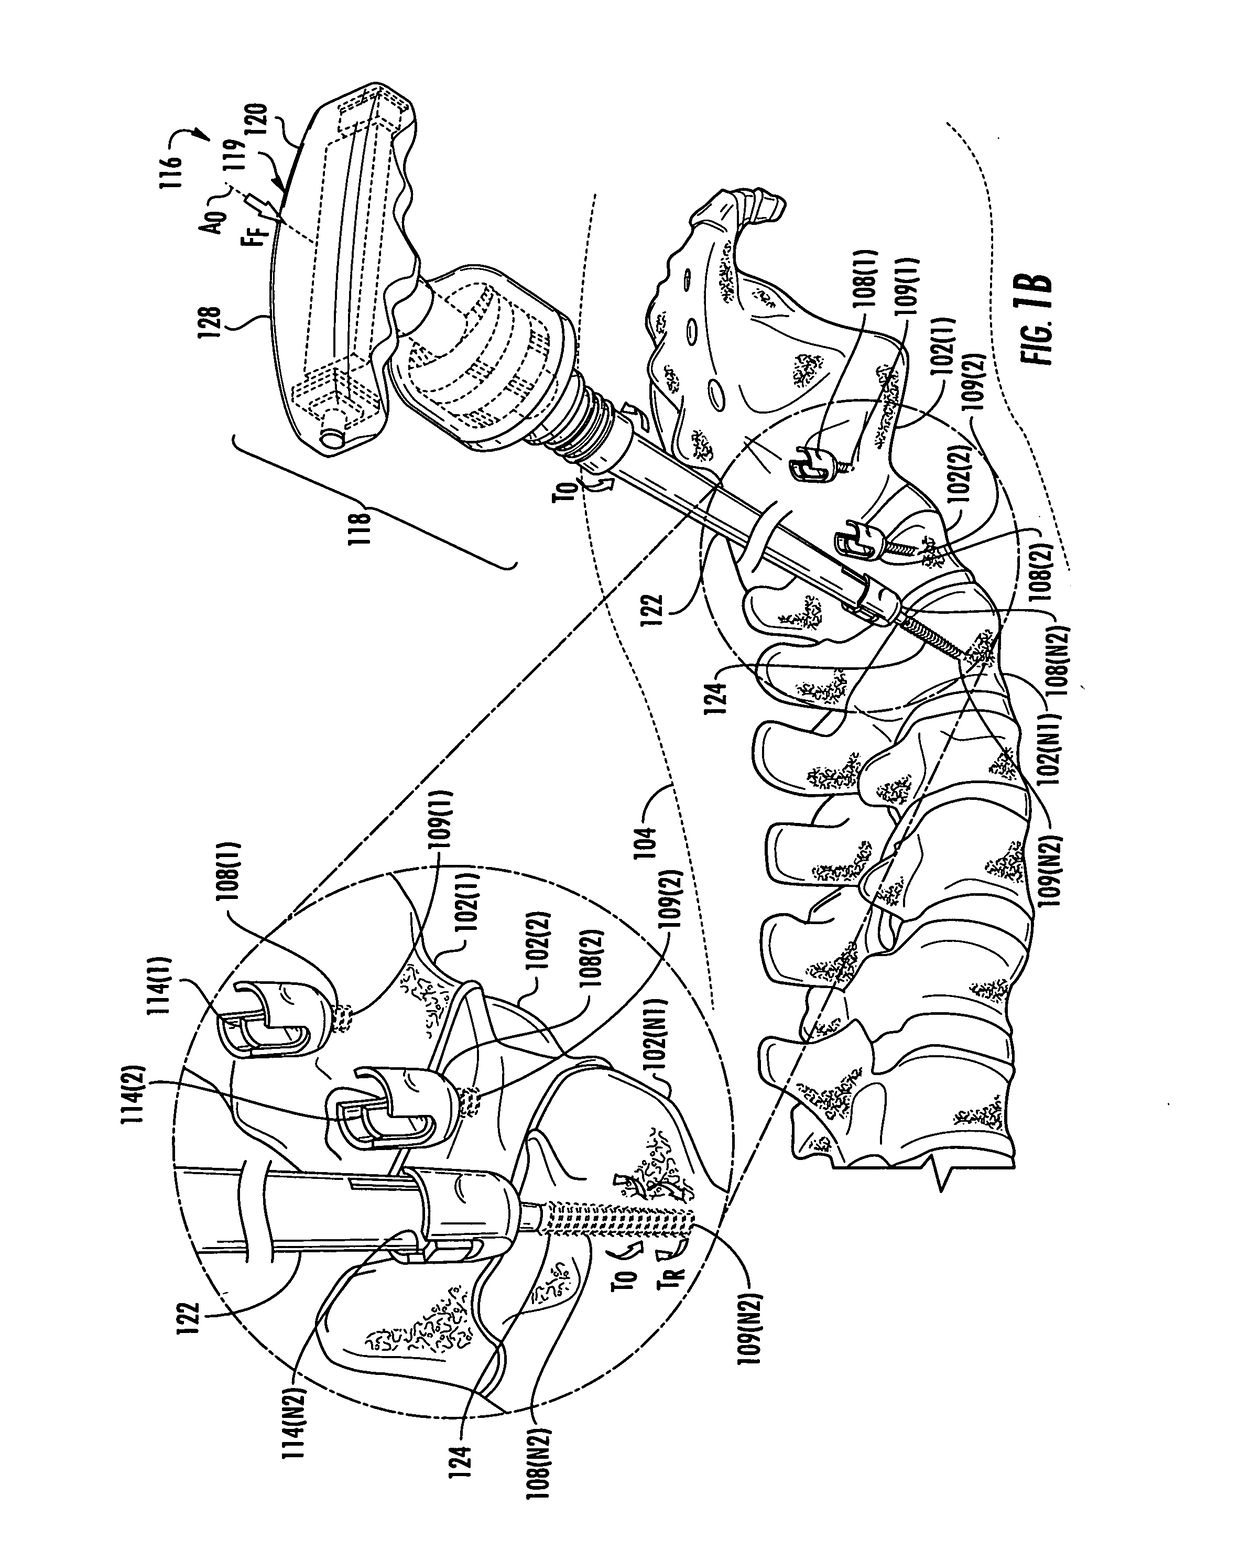 Multi-mode torque drivers employing anti-backdrive units for managing pedicle screw attachments with vertebrae, and related systems and methods